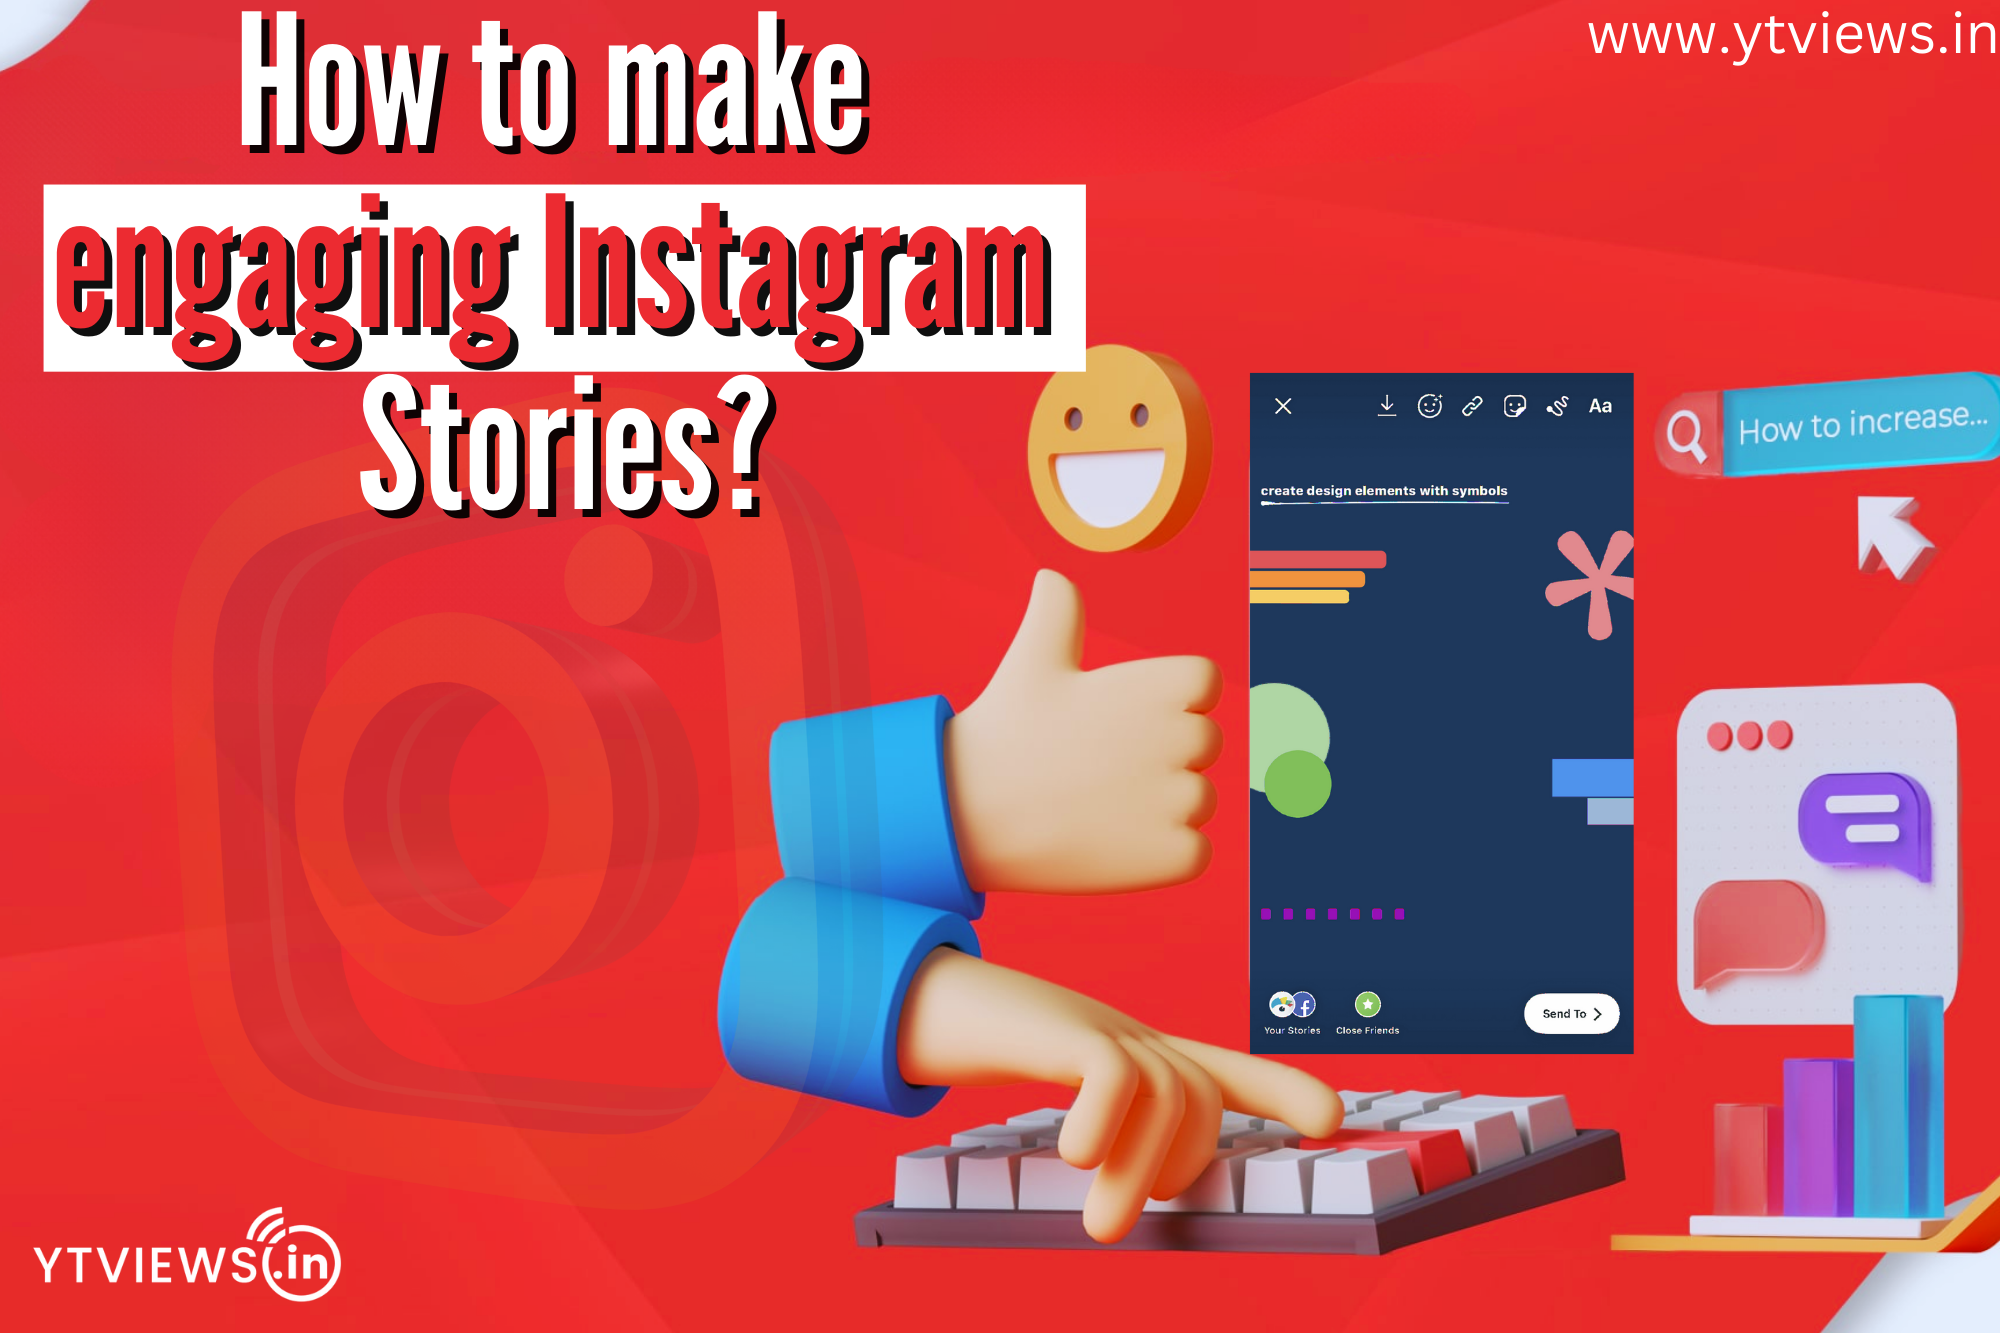 How to make engaging Instagram stories?